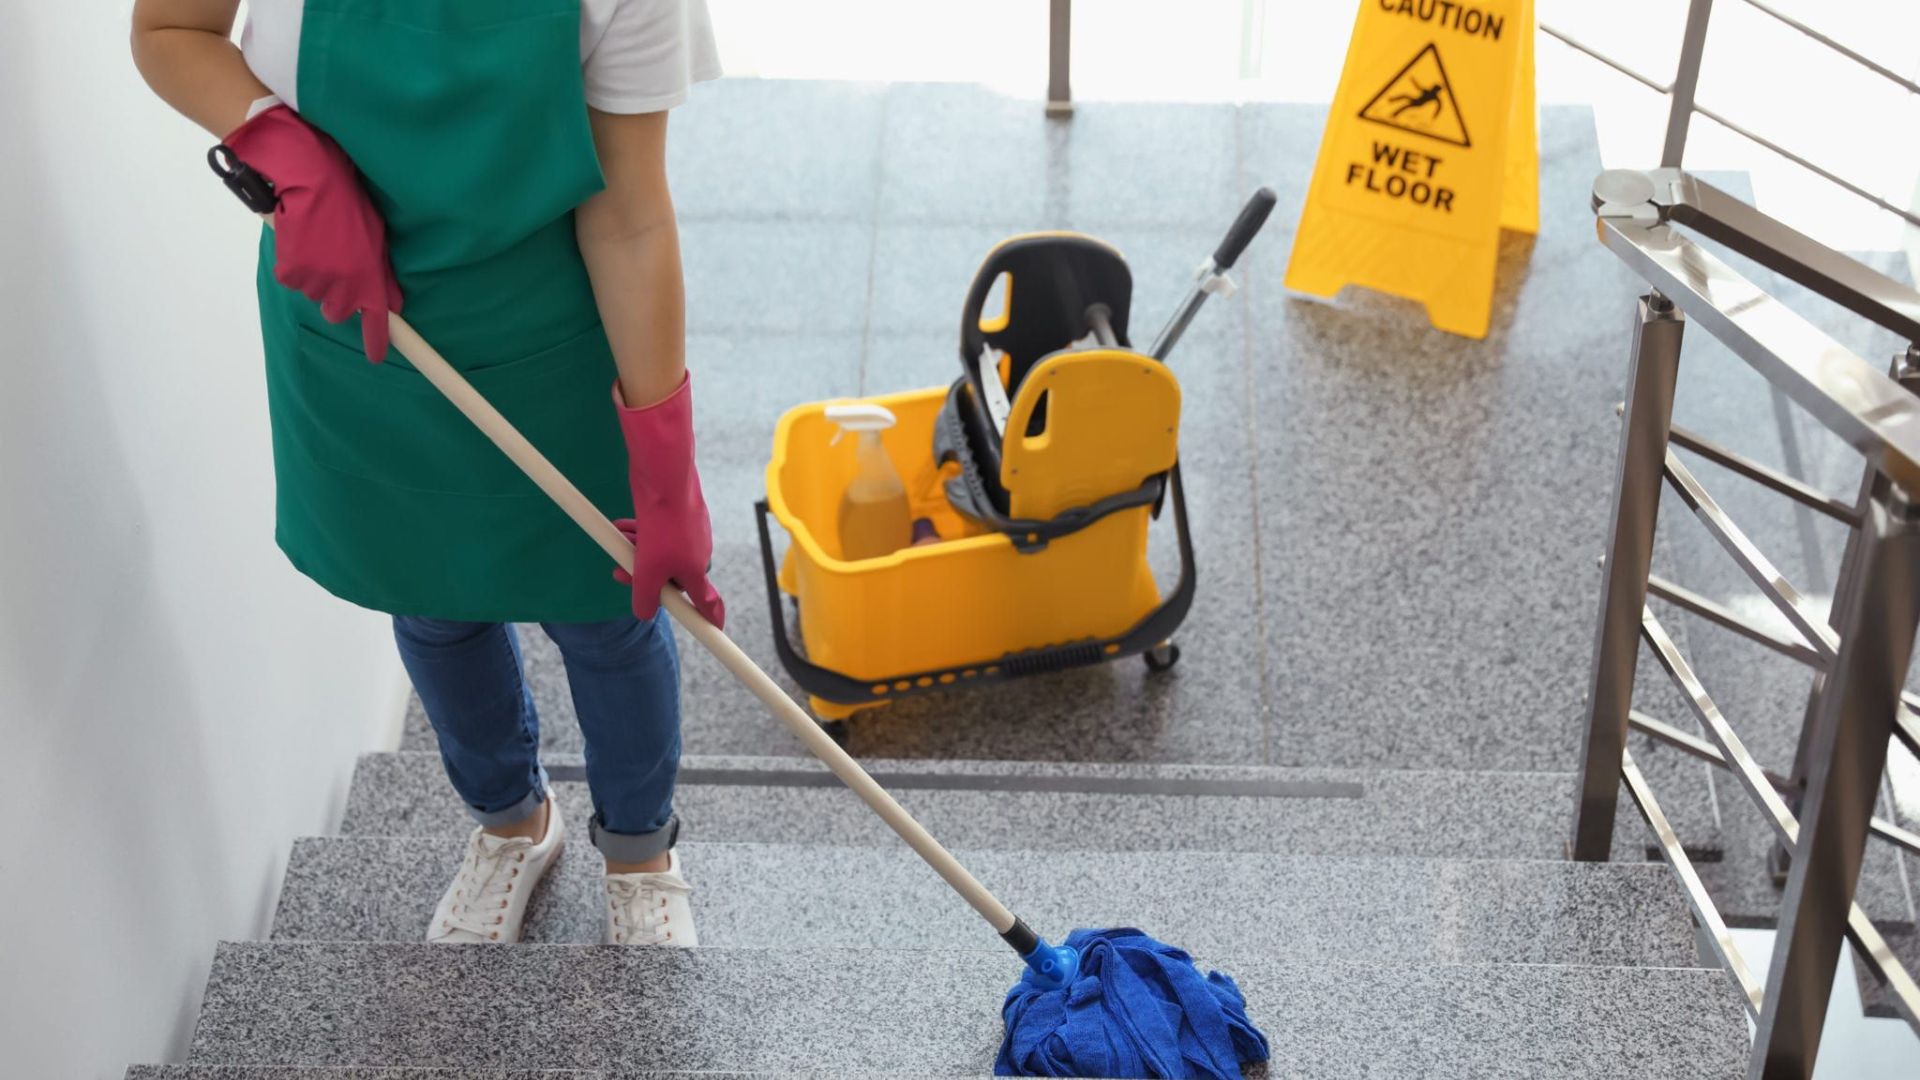 What Are the Benefits of Professional Cleaning Services